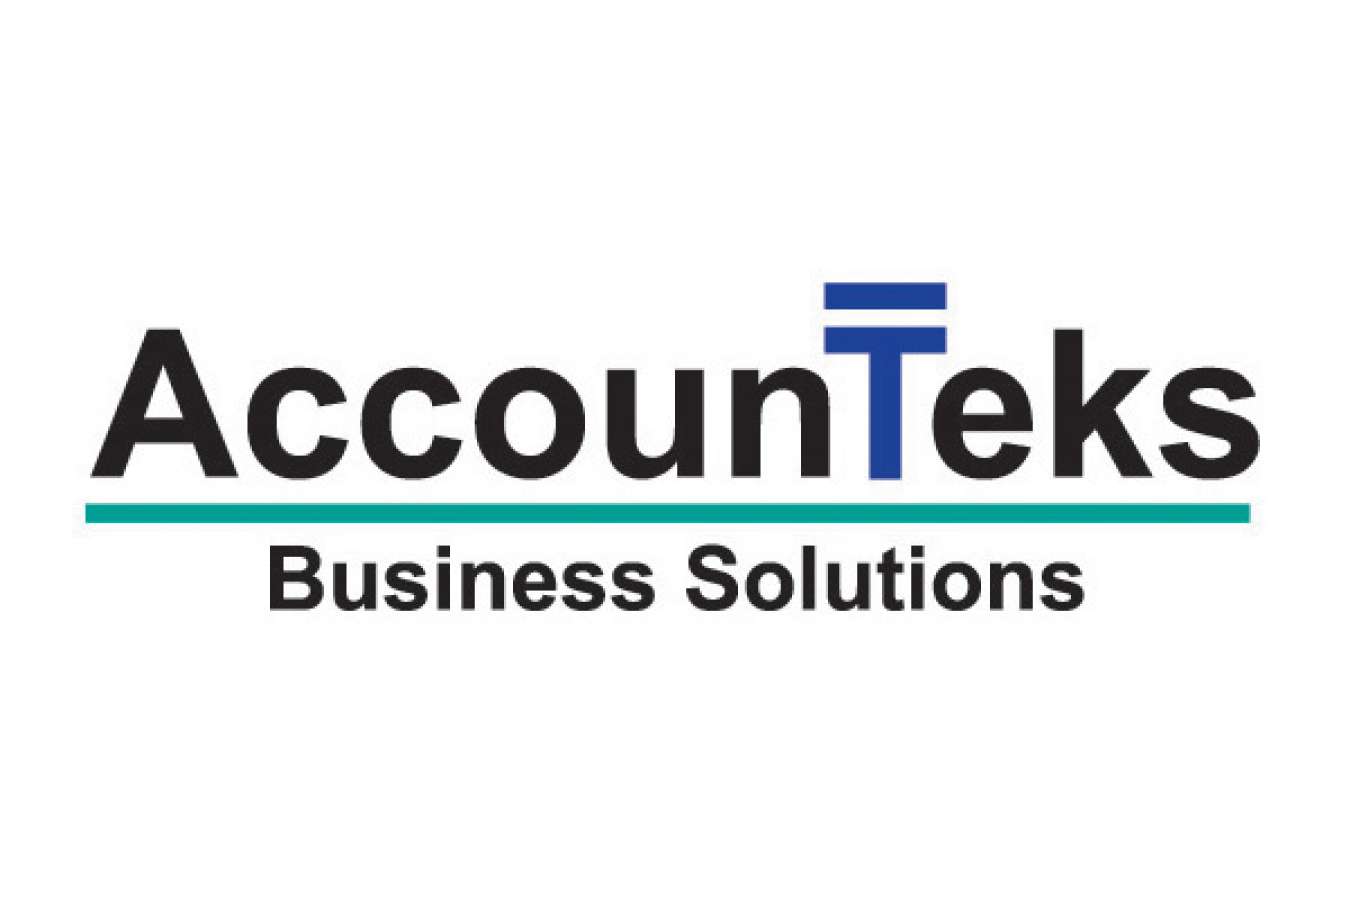 Logo 1 : Accounteks provides bookkeeping and consulting services to business and government contractors